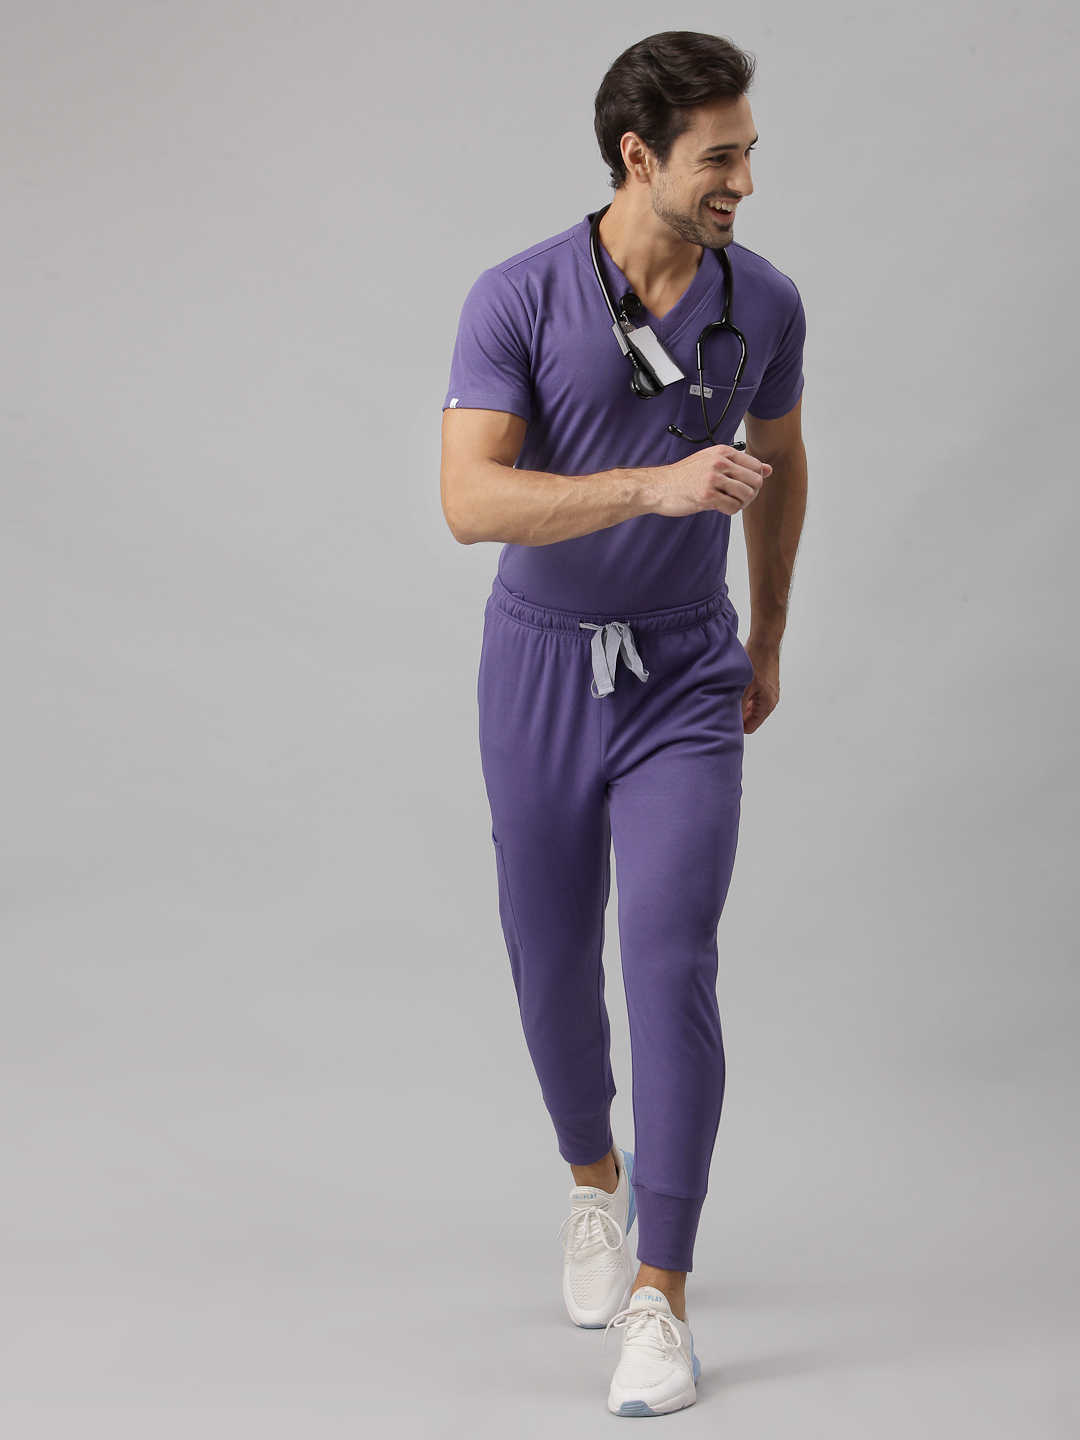 High-waisted pants. Special male fit. Smart fit, modern V neck, straight leg pant. 3 pocket top & classic 5 pocket pant Elastic belt with drawstring Engineered with technical comfort.